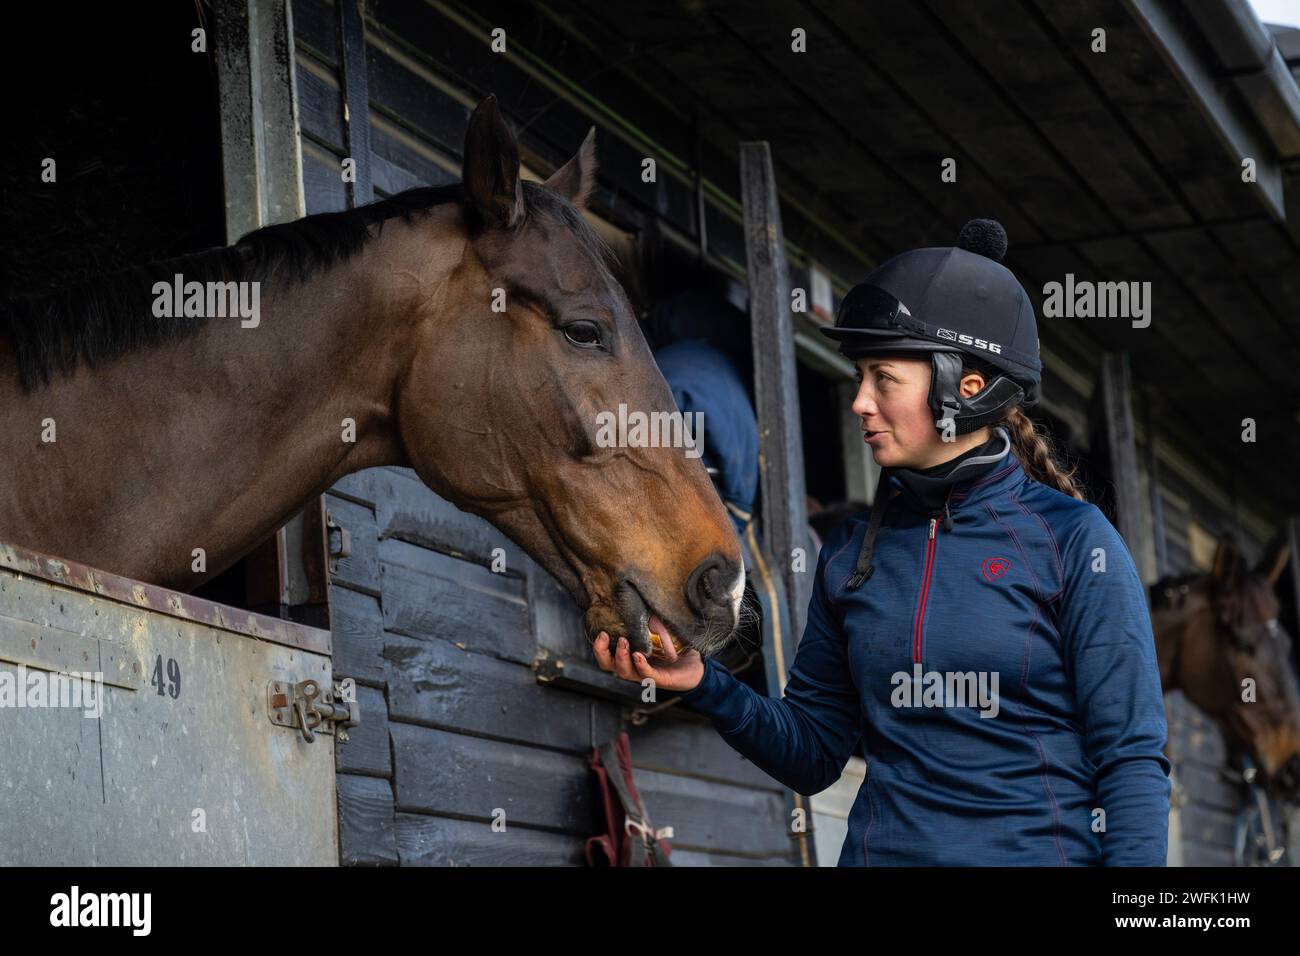 Jockey Bryony Frost with National Hunt race horse Frodon on his last day at Paul Nicholls' yard after his retirement. Stock Photo